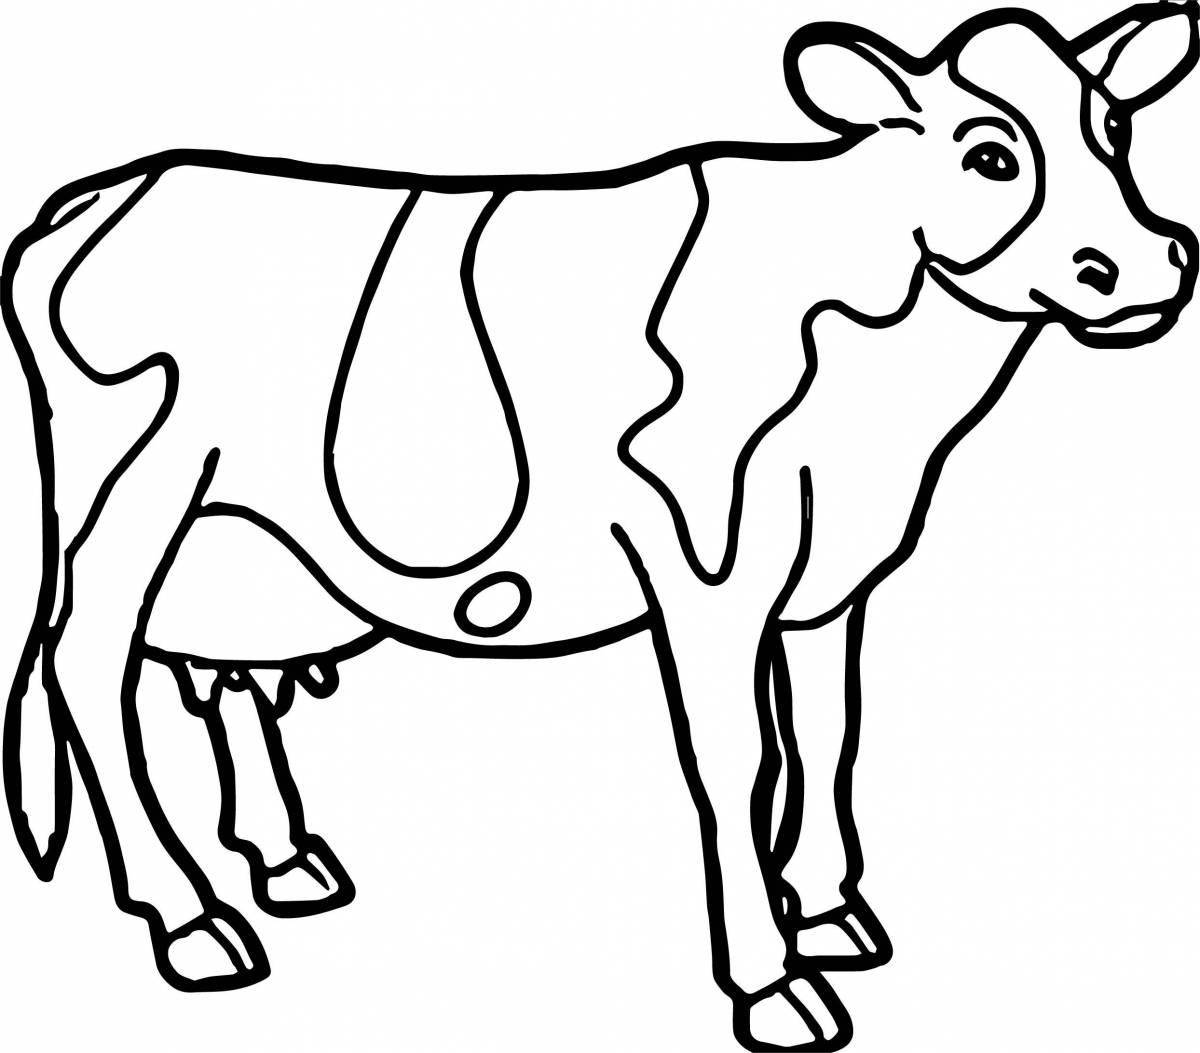 Joyful cow coloring for kids 2 3 years old